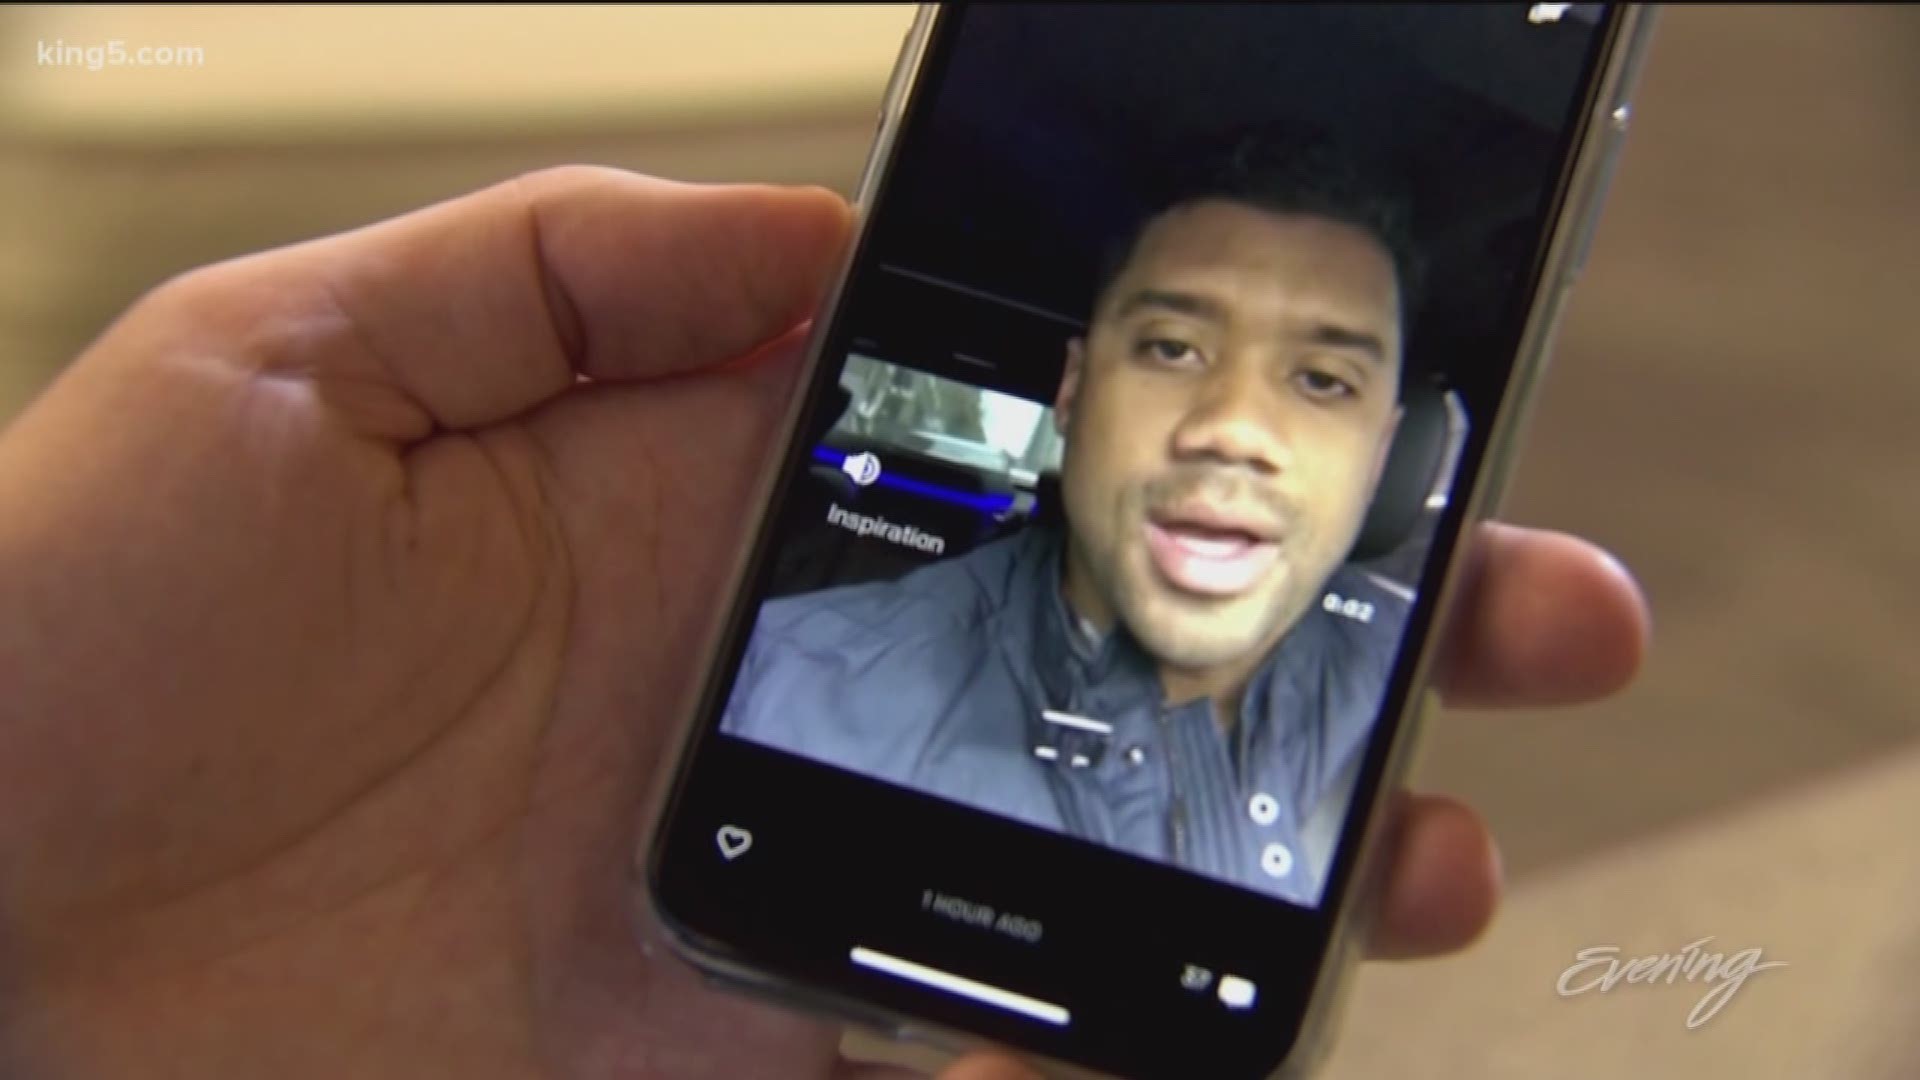 Russell Wilson is more DANGERUSS than ever! The Seahawks quarterback is already an international superstar. But now fans can get up close and personal like never before. Wilson is all into the social media revolution with his latest venture "TraceMe."